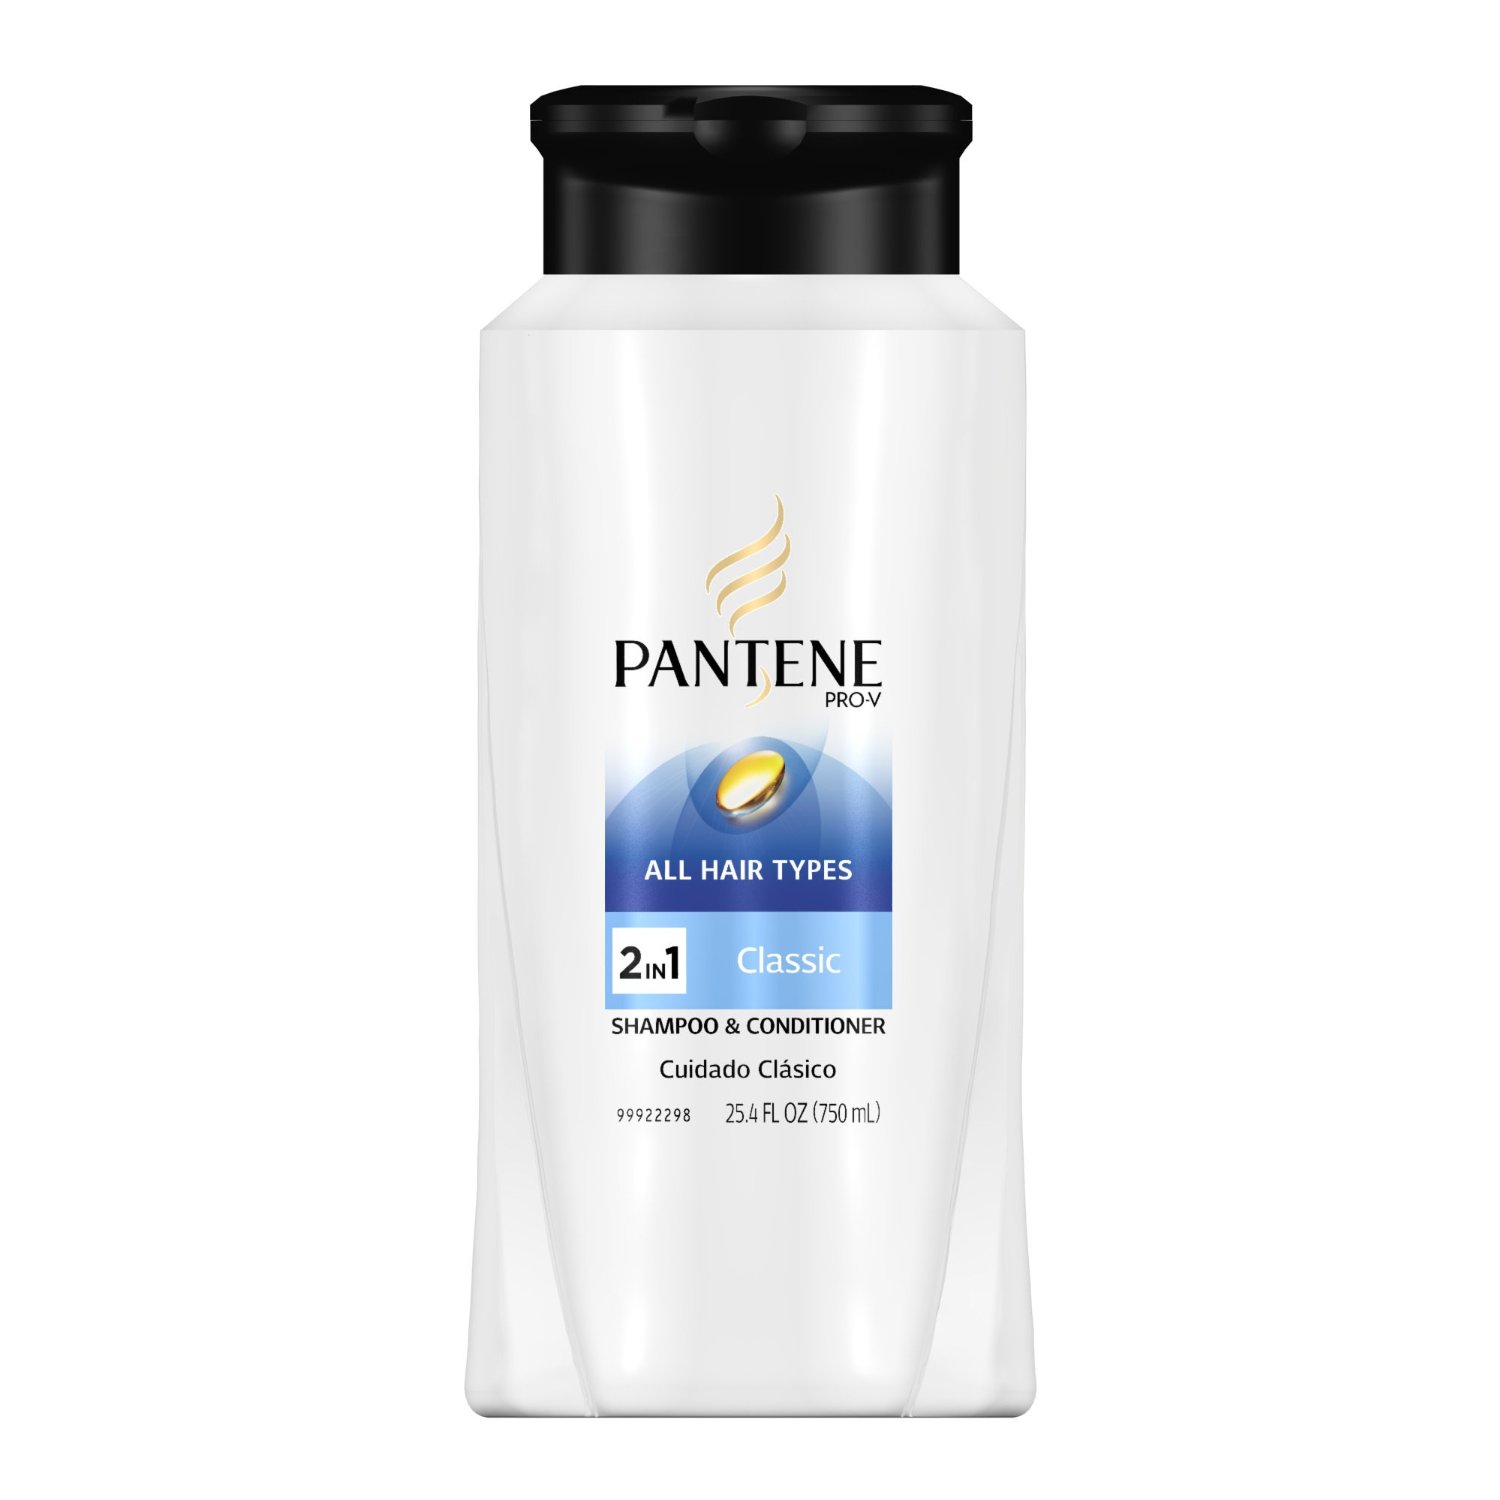 Amazon: Up to 40% off Pantene products, extra $3 off, 5% off + free shipping